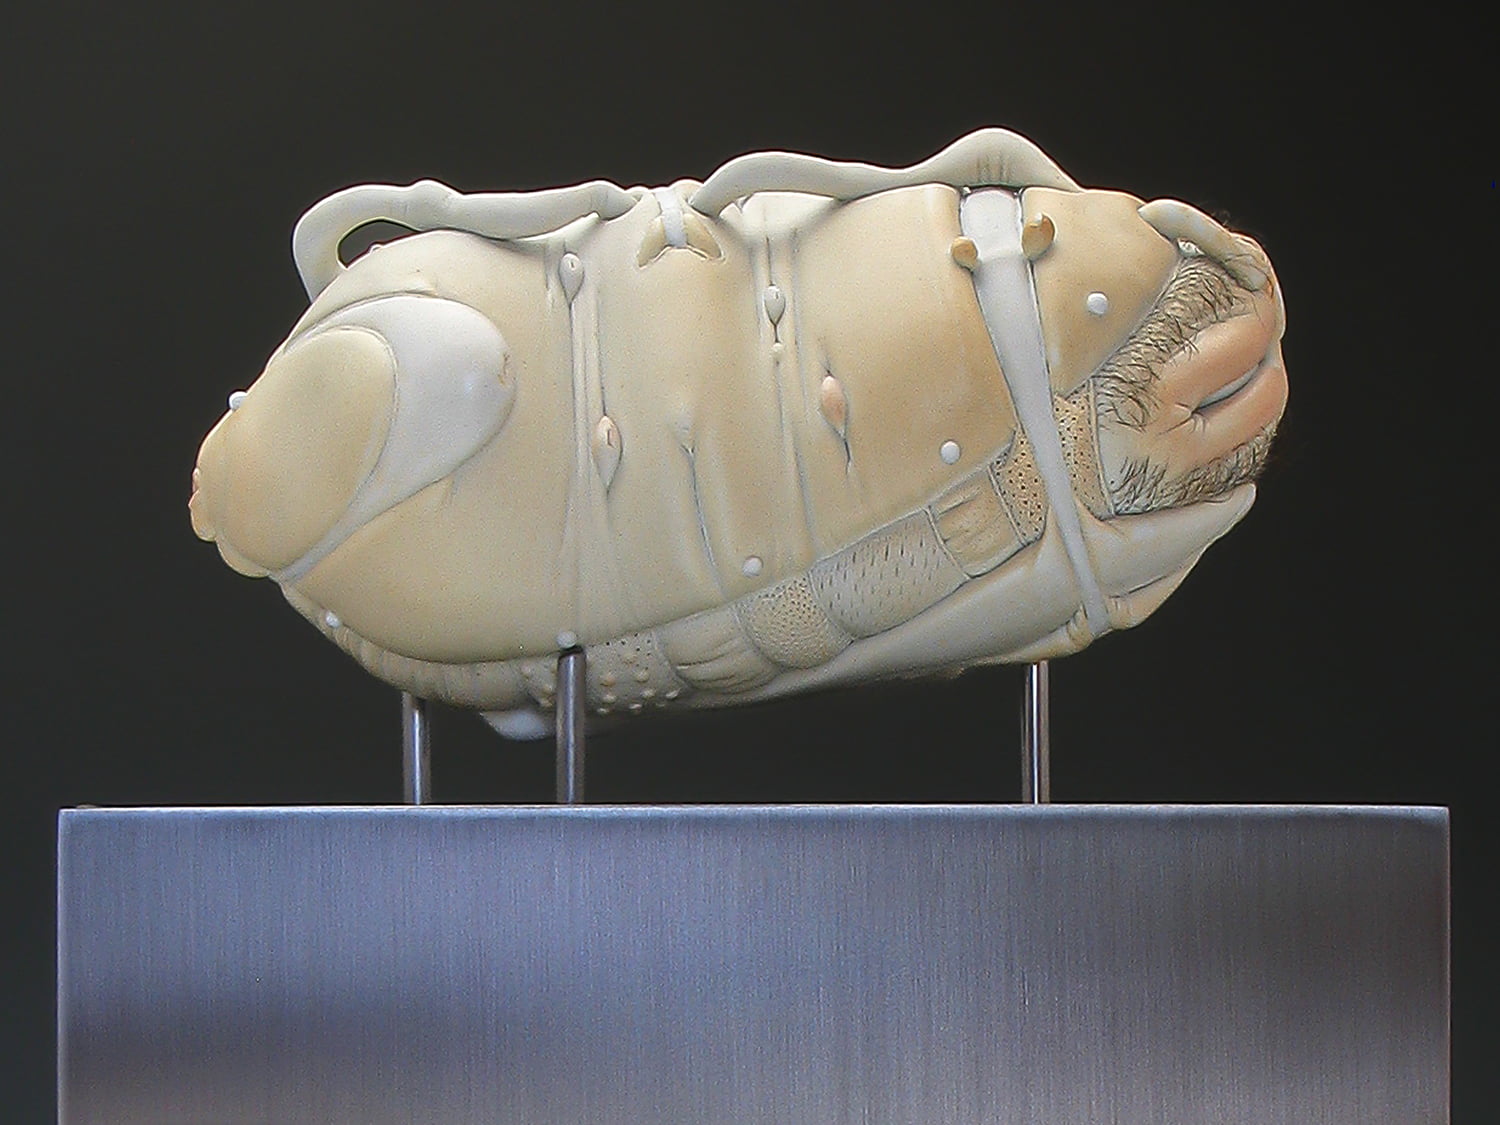 Jason Briggs "Polly" (alternative view). Porcelain, hair, and mixed media. Sculptural ceramic art object.